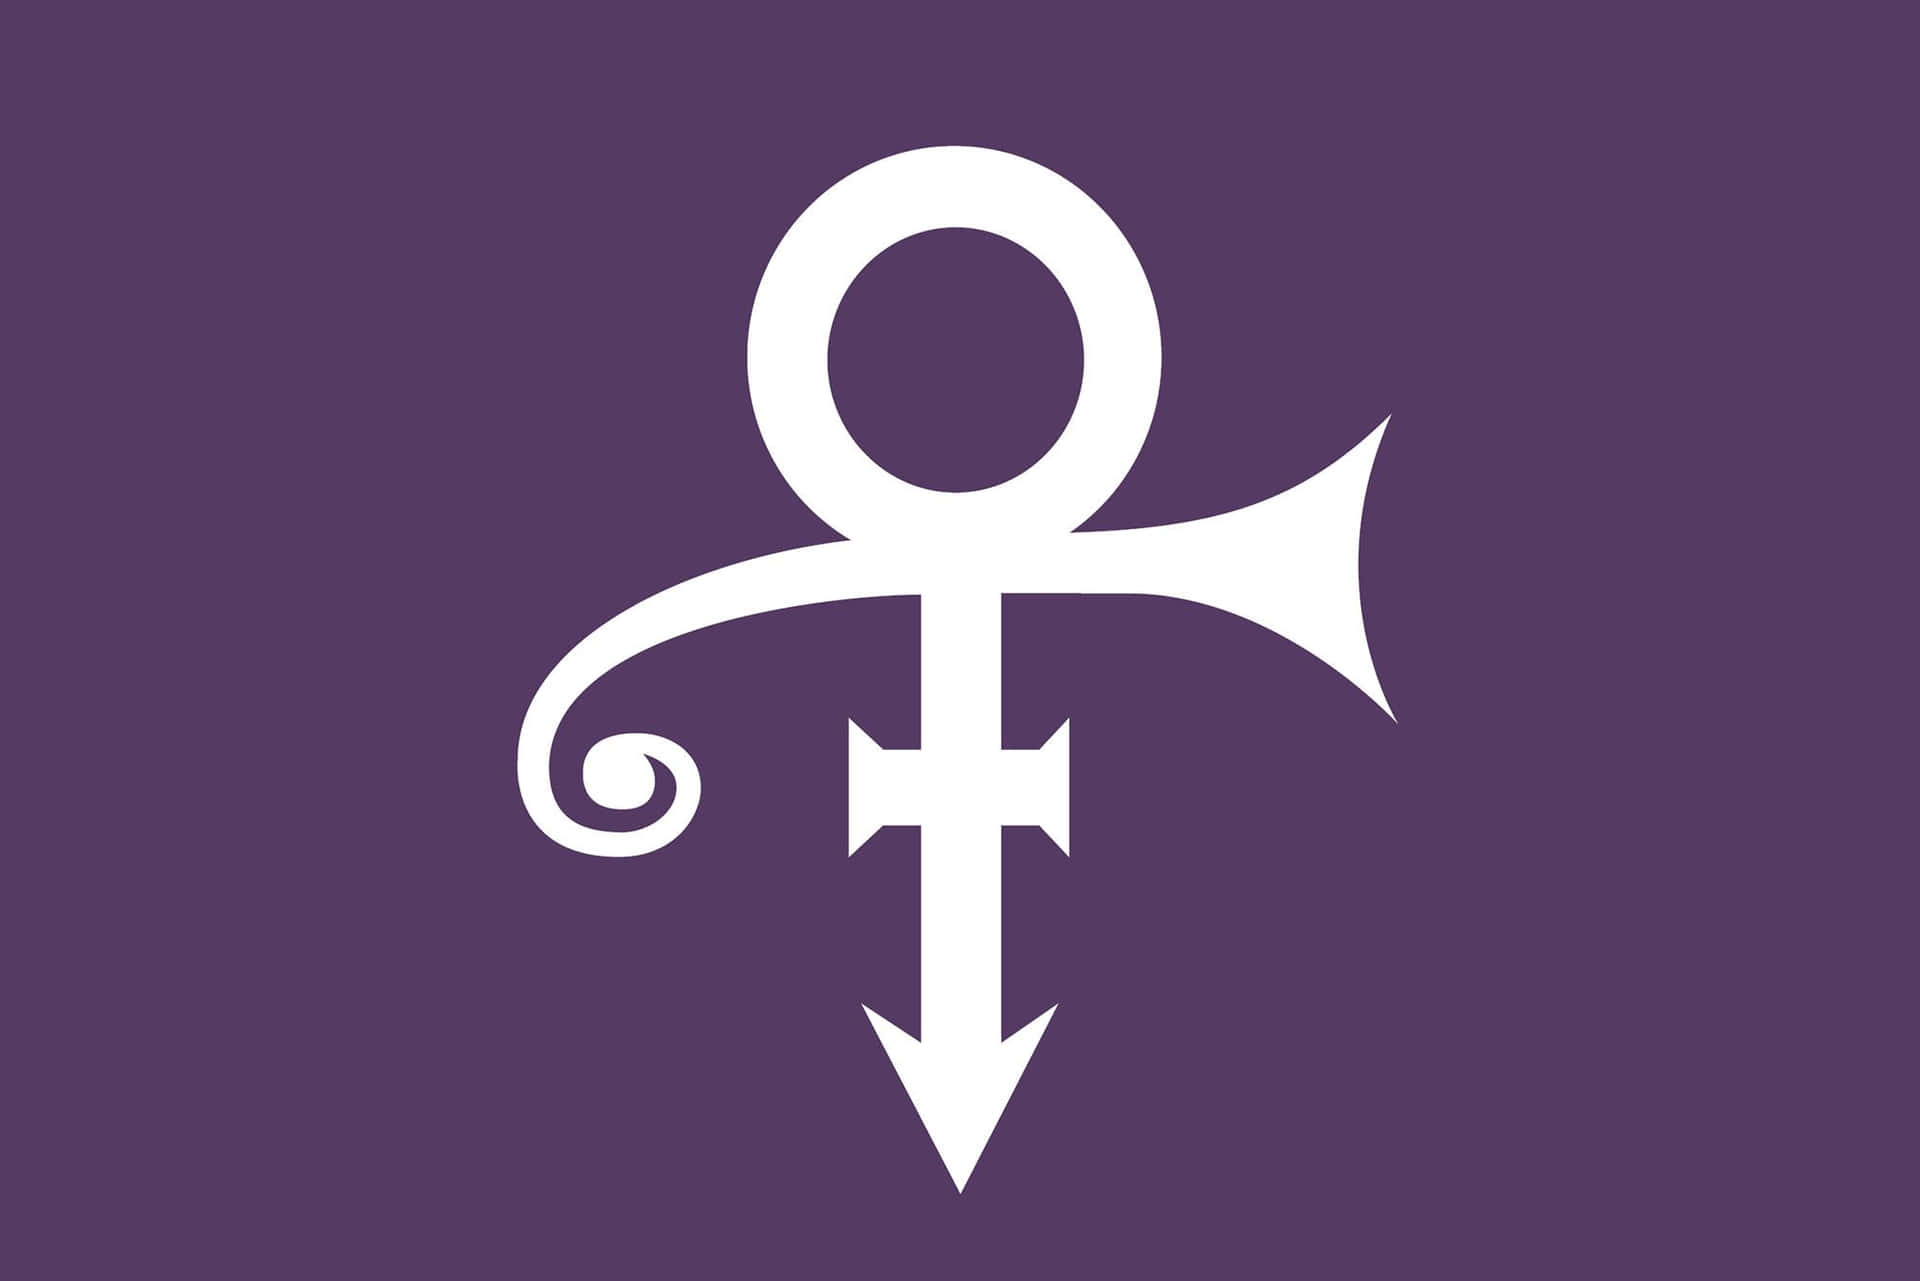 Prince Symbol In Violet And White Colors Wallpaper